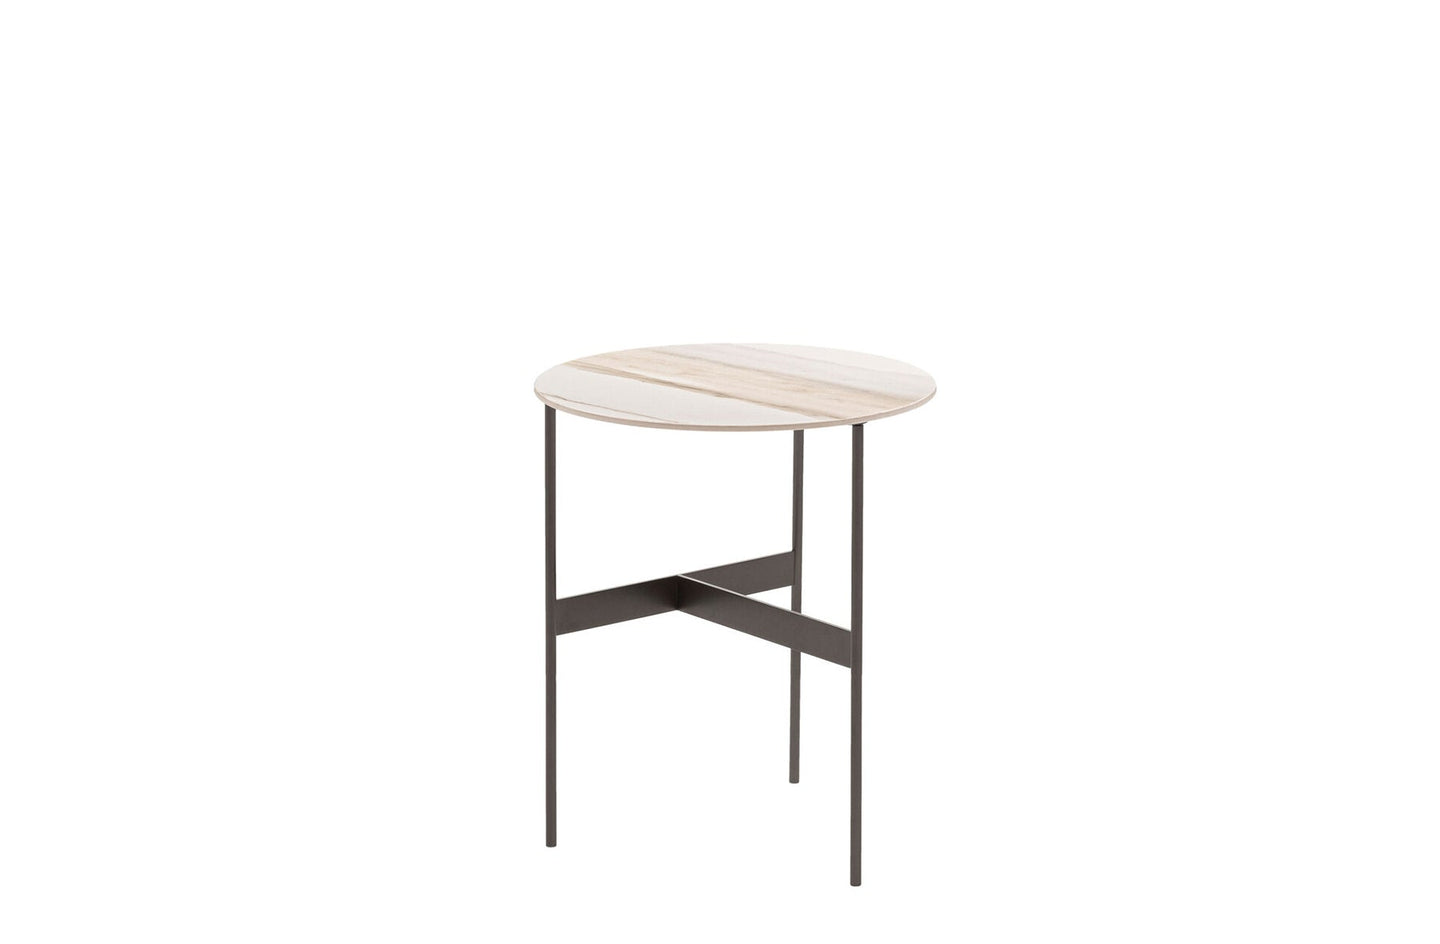 Formiche Side Table
